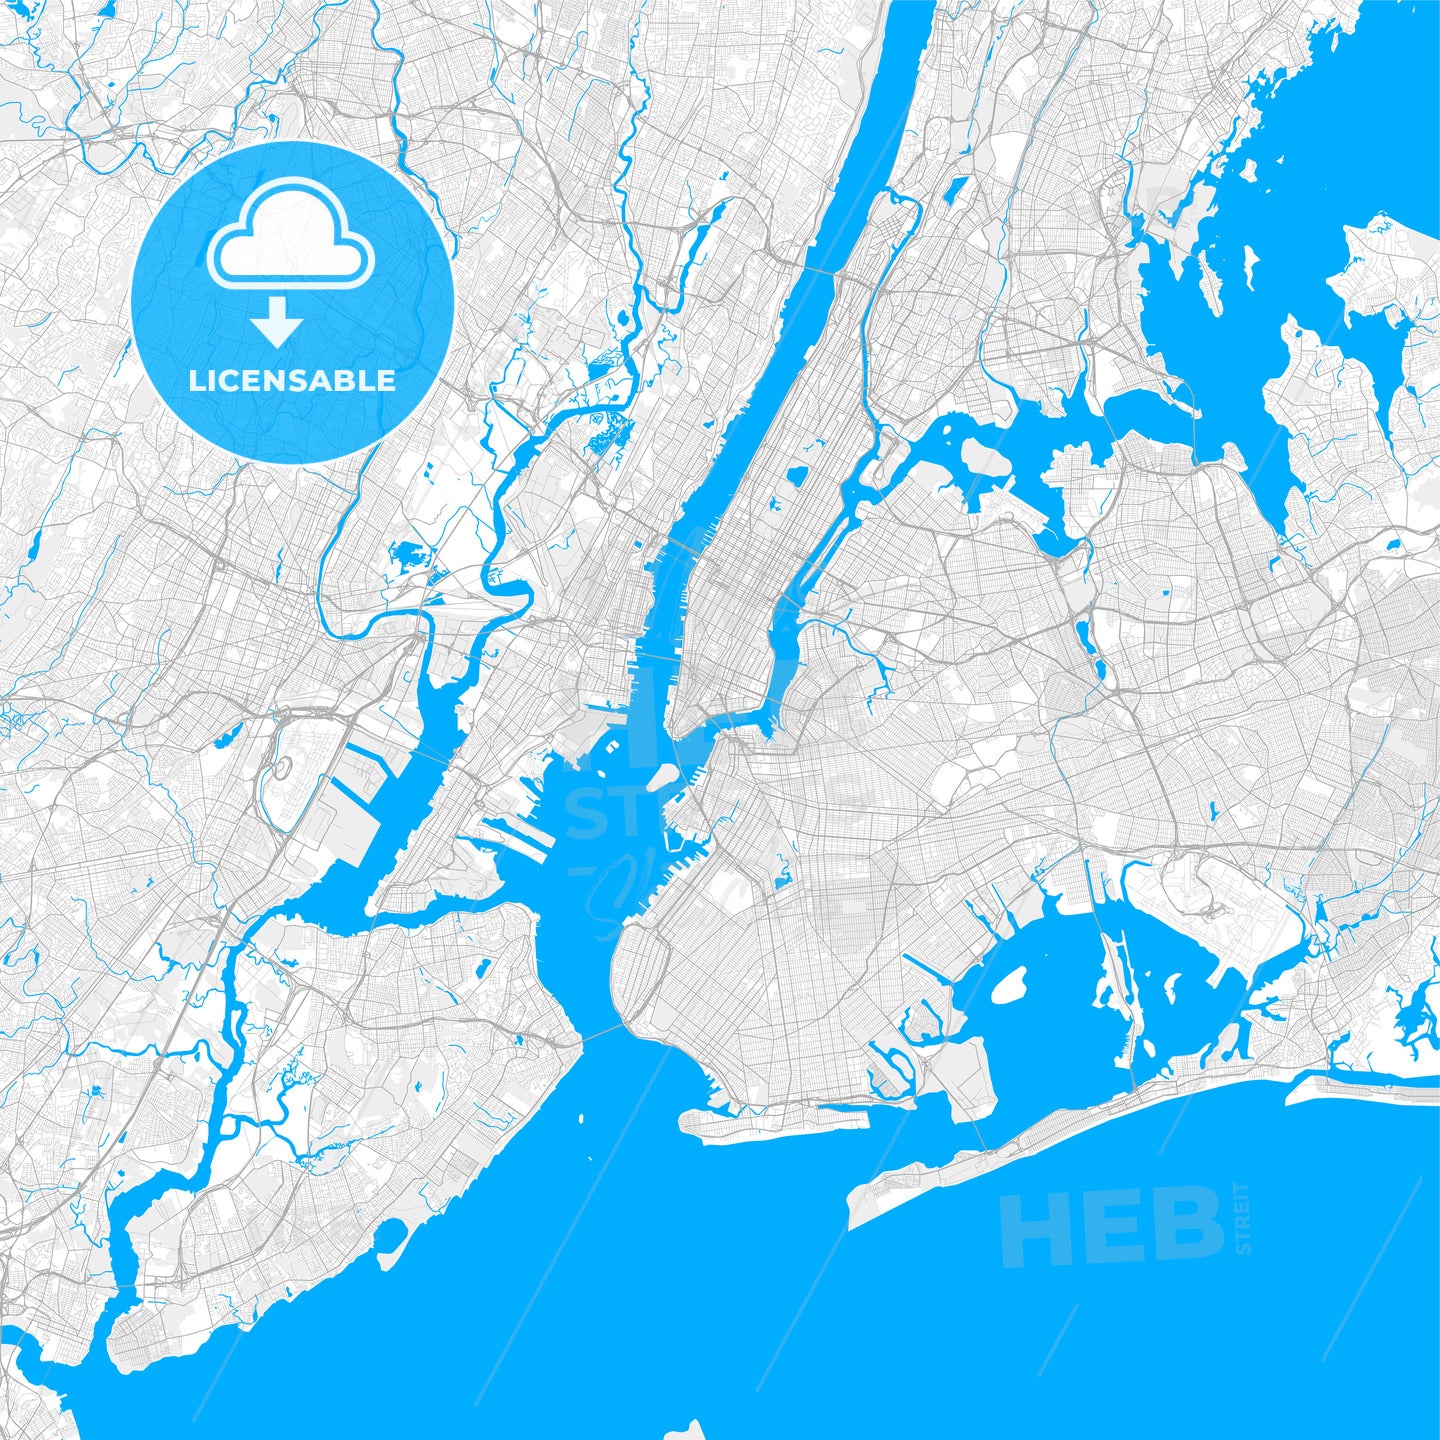 Rich detailed vector map of New York City, New York, U.S.A.